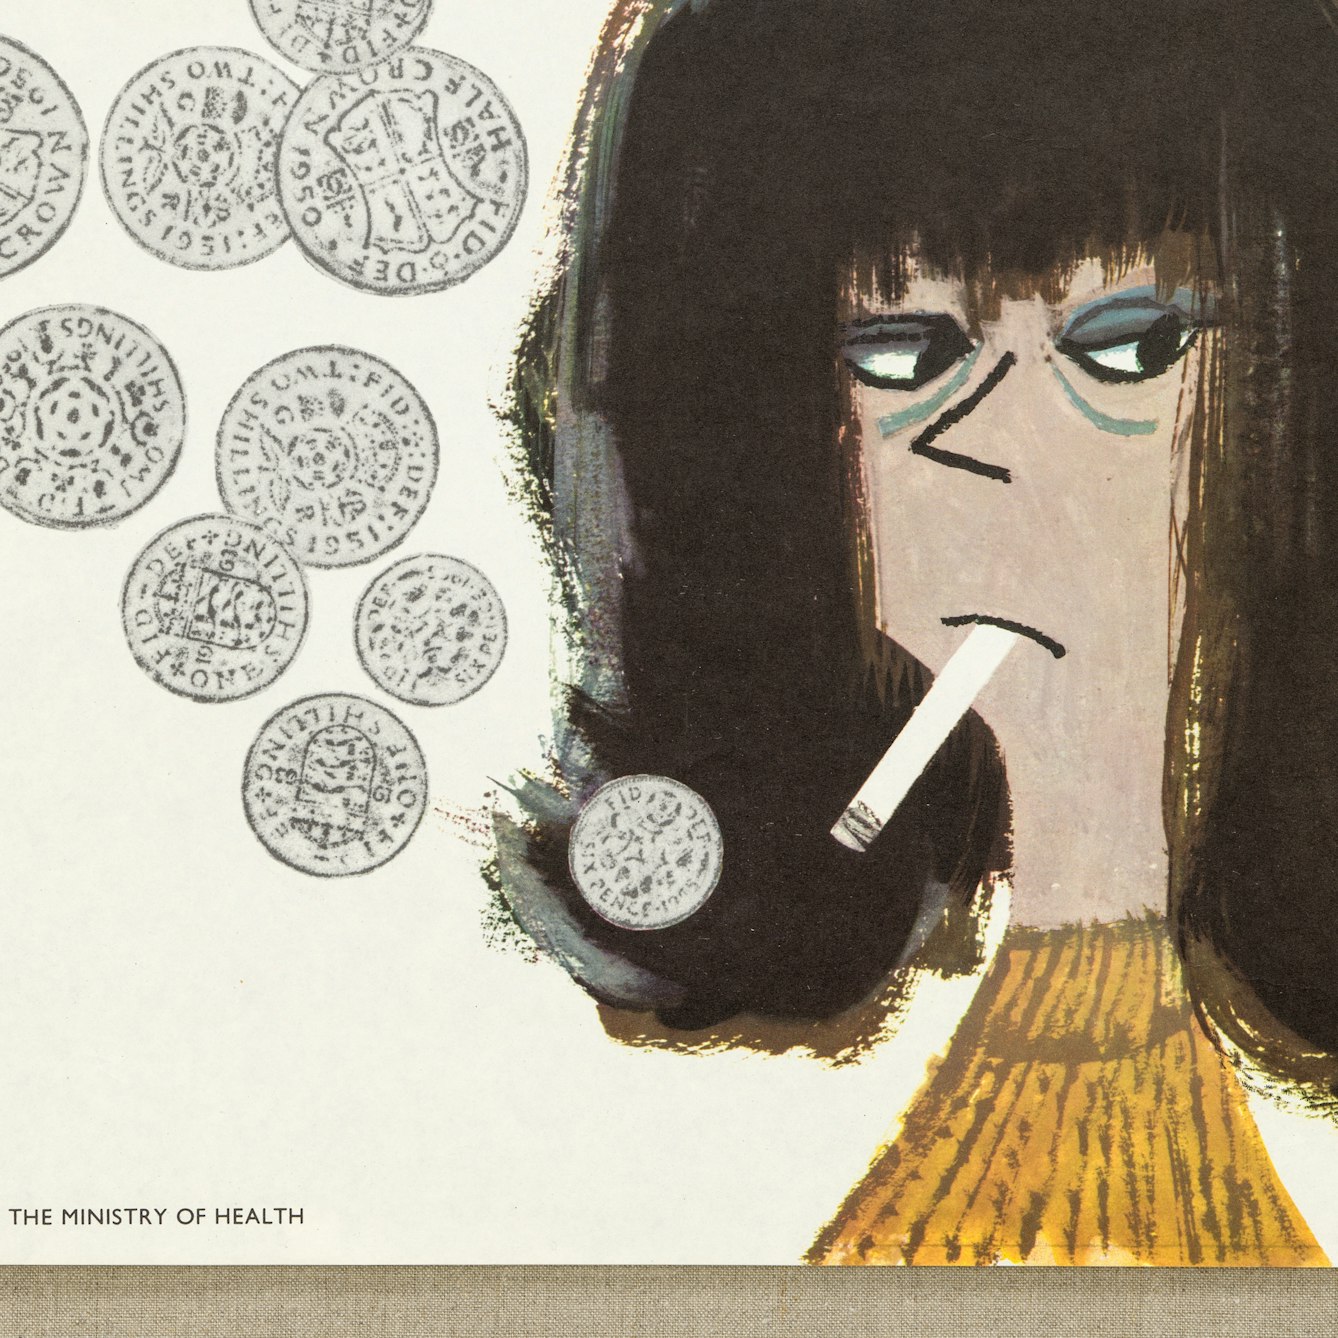 Image showing a woman smoking with coins in place of the smoke. The text reads: "So she said she was giving up smoking so she could save money and I said don't be daft you won't save a penny and my Norman agrees with me. But the next thing you know she's got herself one of those cut-out dresses and a trouser suit and a pair of those white boots on top of which she's got rid of that cough and what's more my Norman's dating her up. Honestly you can't trust some people can you!"